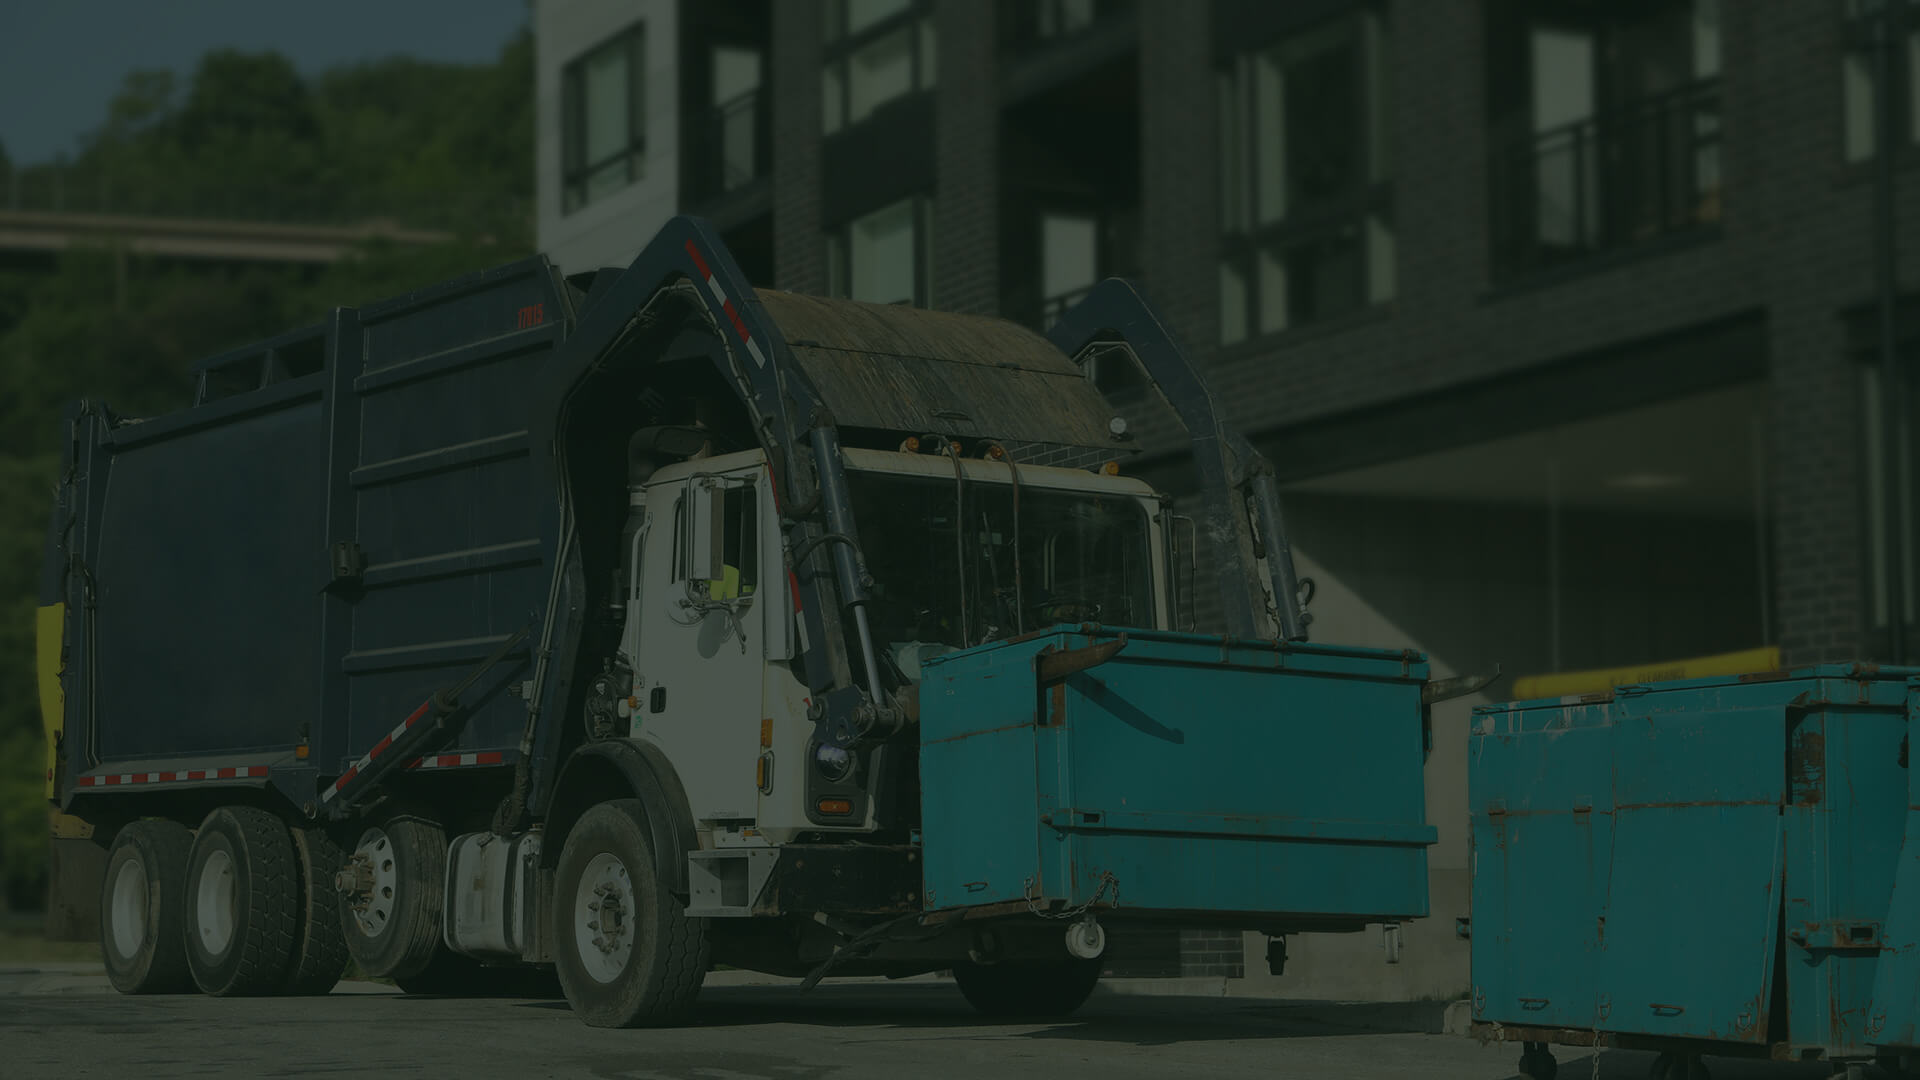 A truck picks up a dumpster container